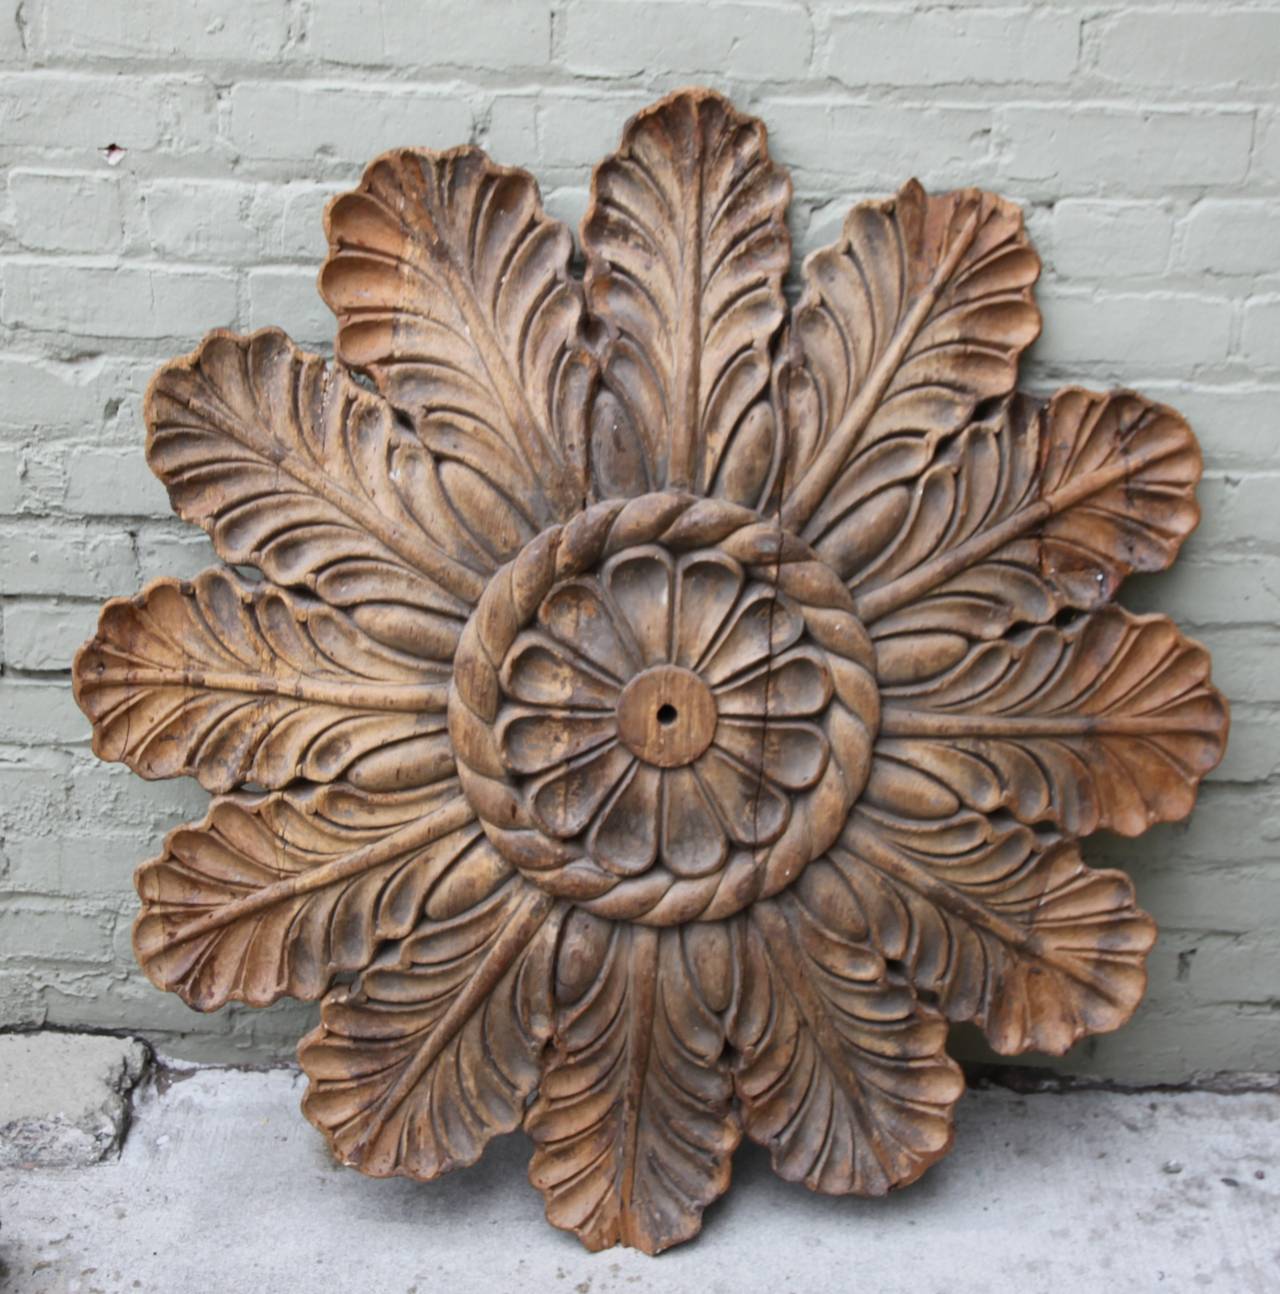 19th century Italian walnut architectural ceiling carving made from carved acanthus leaves.